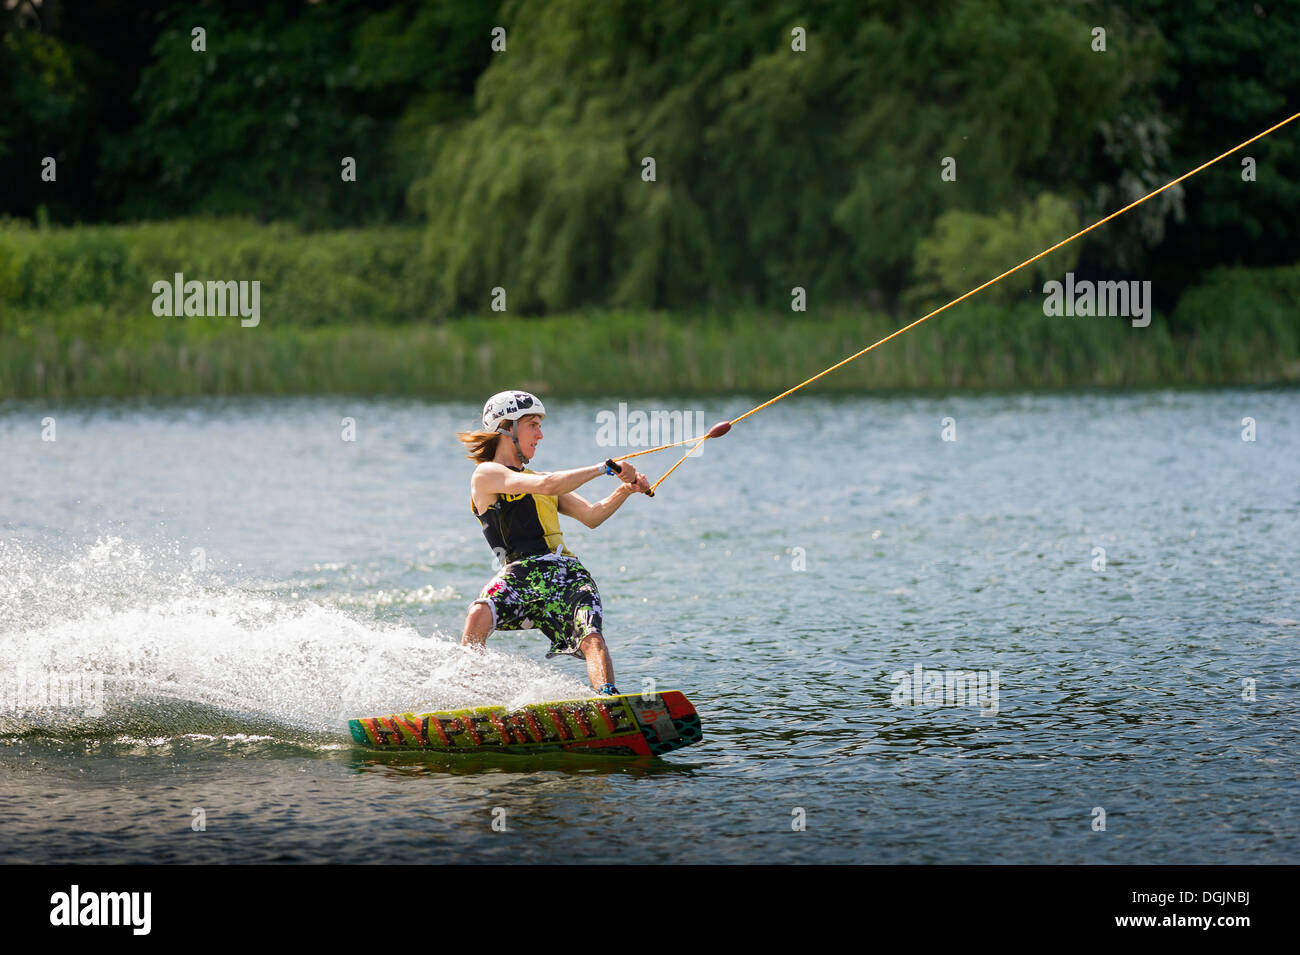 Wakeboarding at the Basildon Festival Wakeboard Park in Essex. Stock Photo